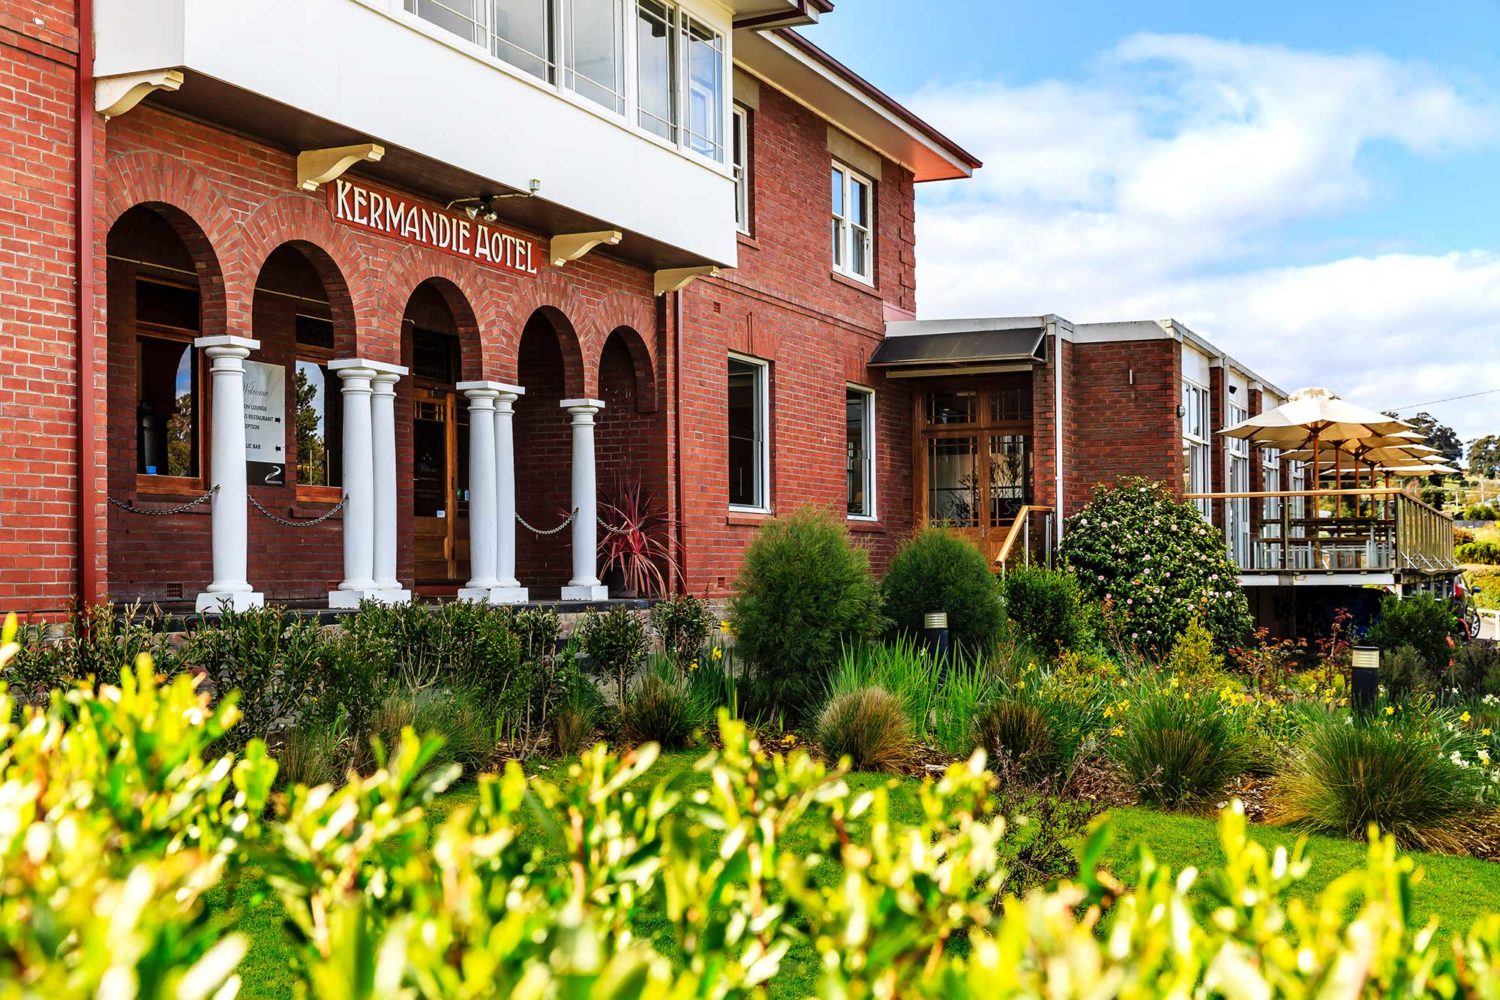 Kermandie wins Bronze at the Tasmanian Hospitality Awards for Excellence